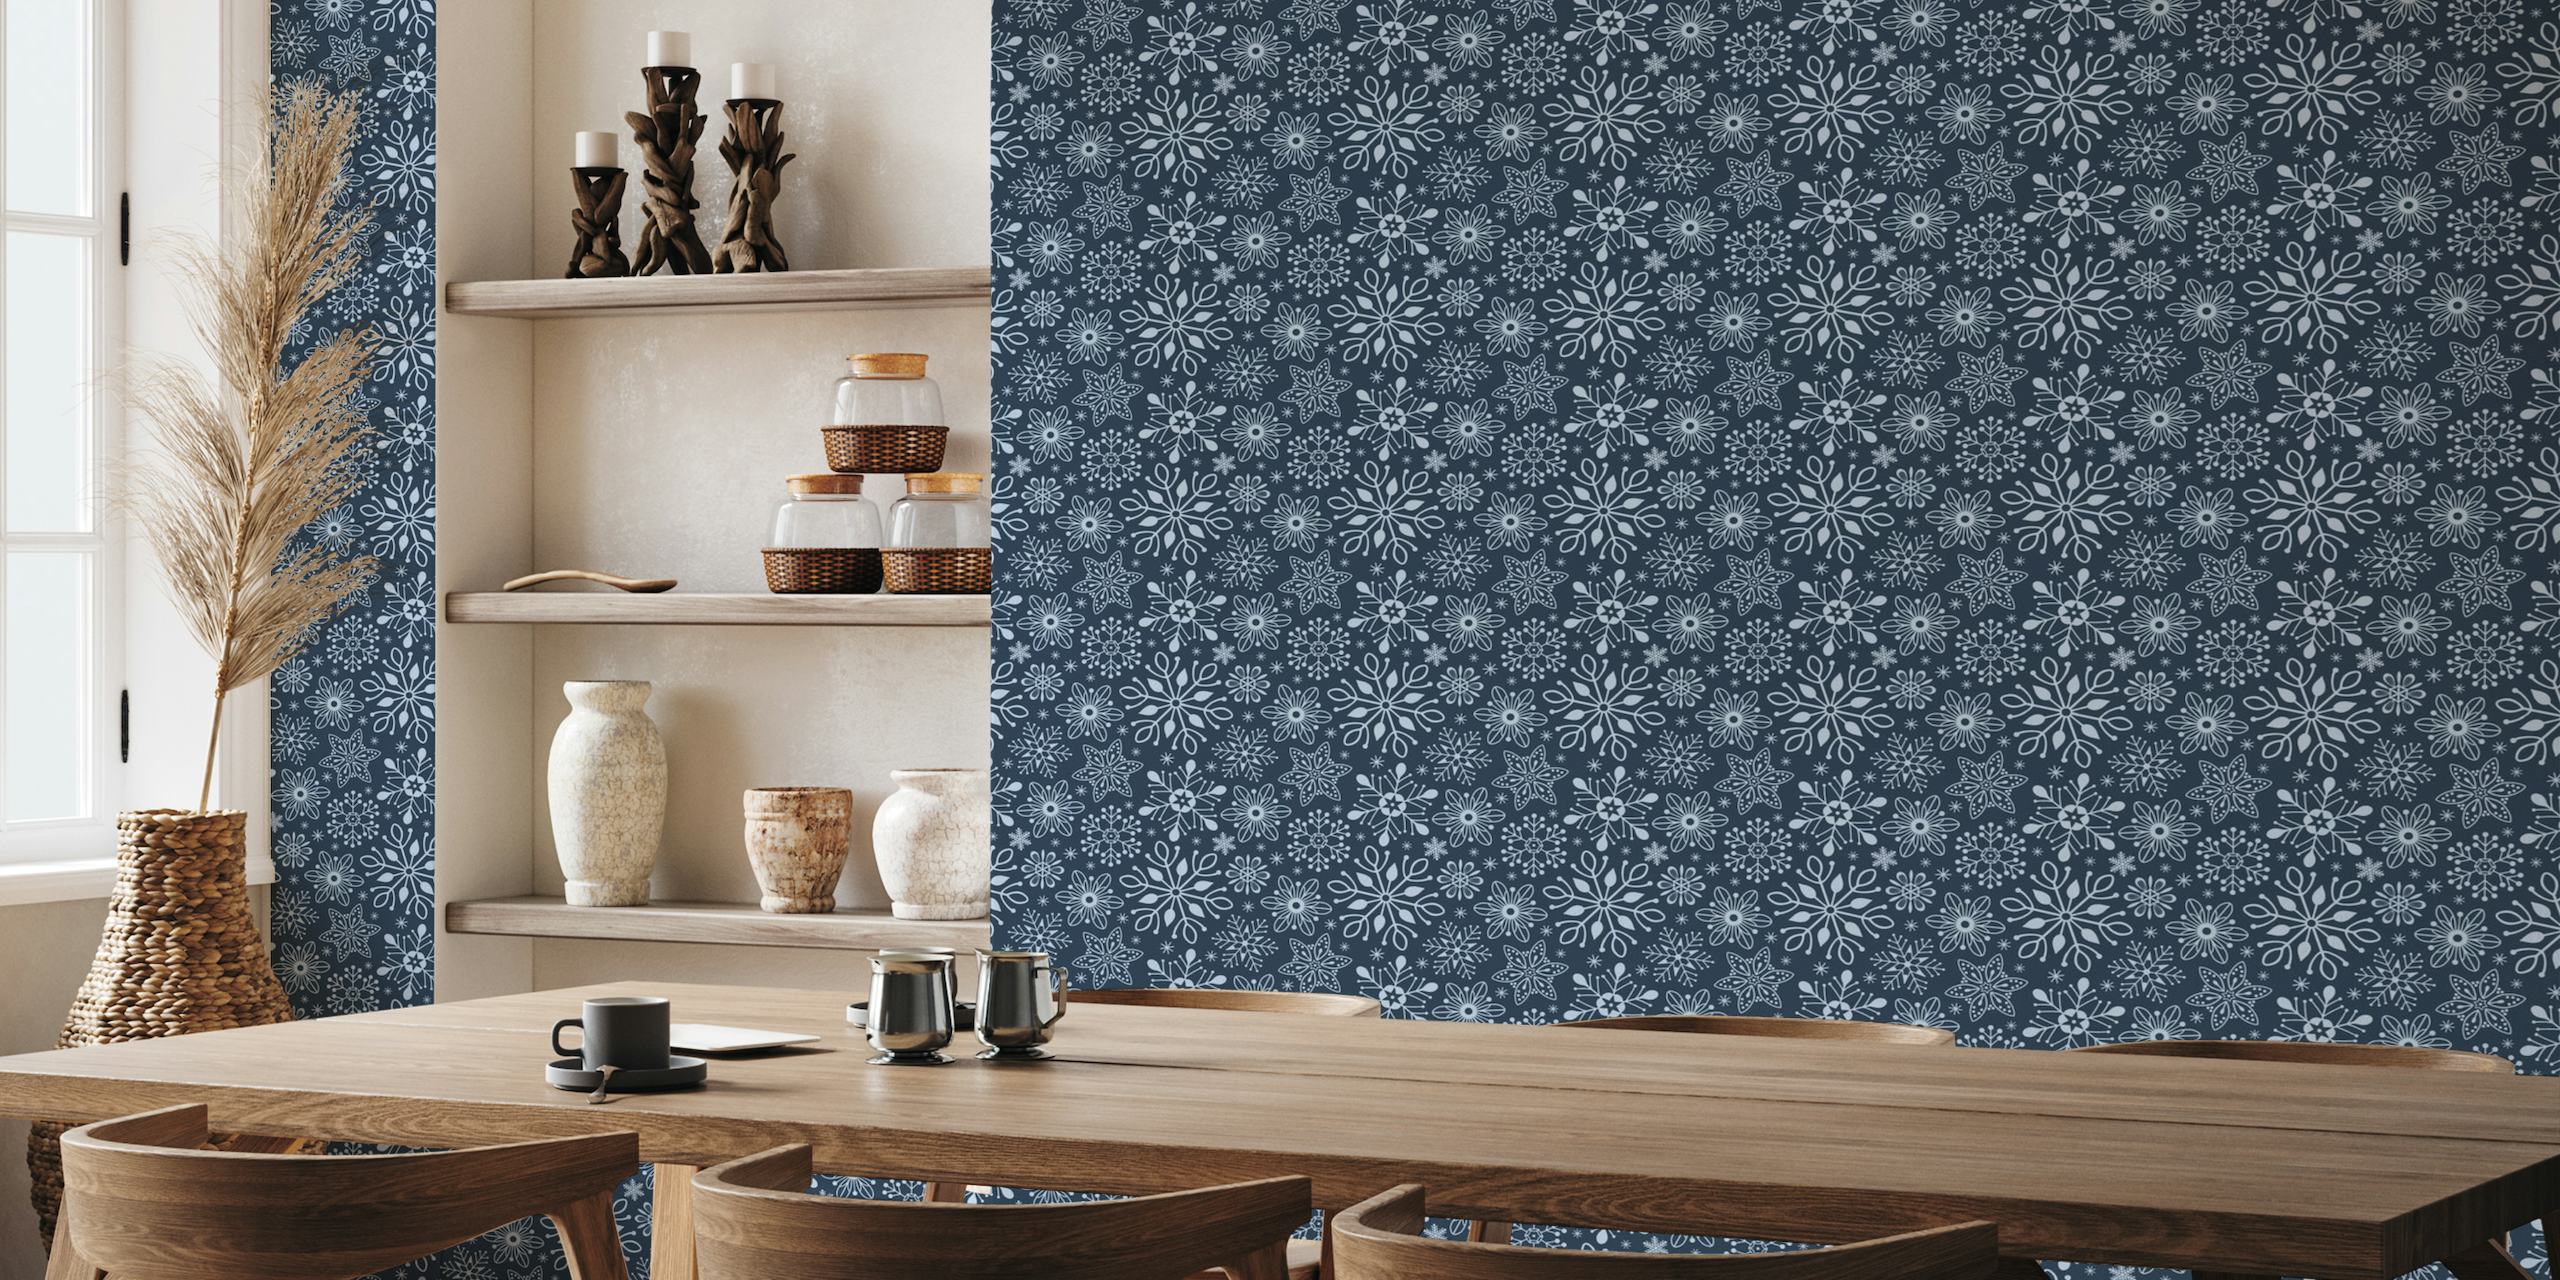 Snowflakes_Cozy 3 wall mural with intricate snowflake designs on a grey background.